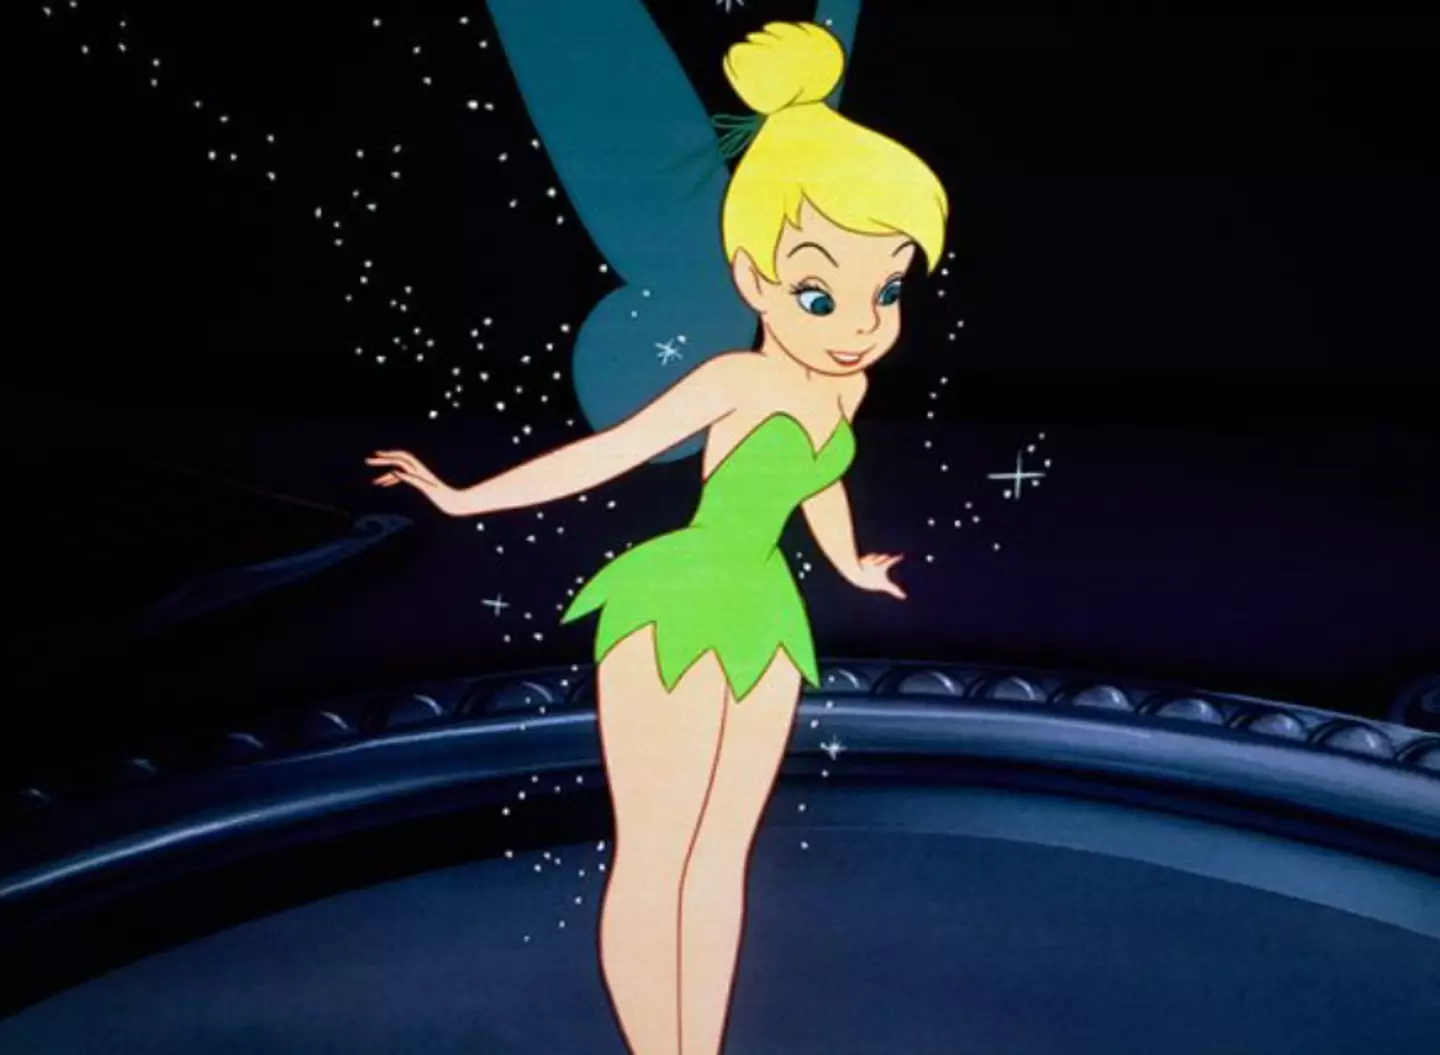 Shahidi plays Tinker Bell in the upcoming Peter Pan movie.